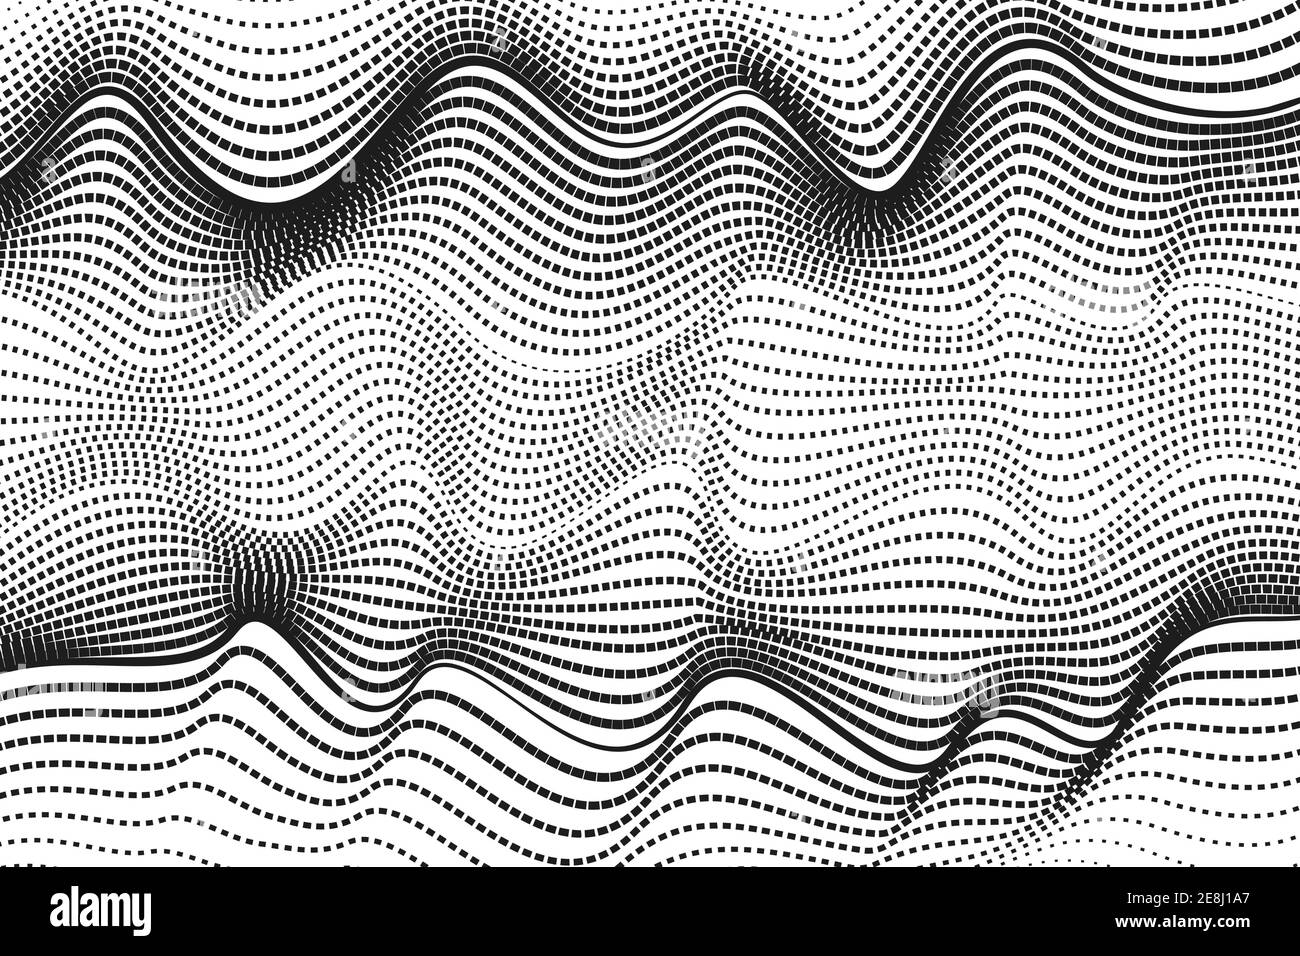 Black dotted ripple lines, white background. Line art pattern. Spotted curves. Monochrome design. Abstract vector bw graphic. Radio, sound wave. EPS10 Stock Vector